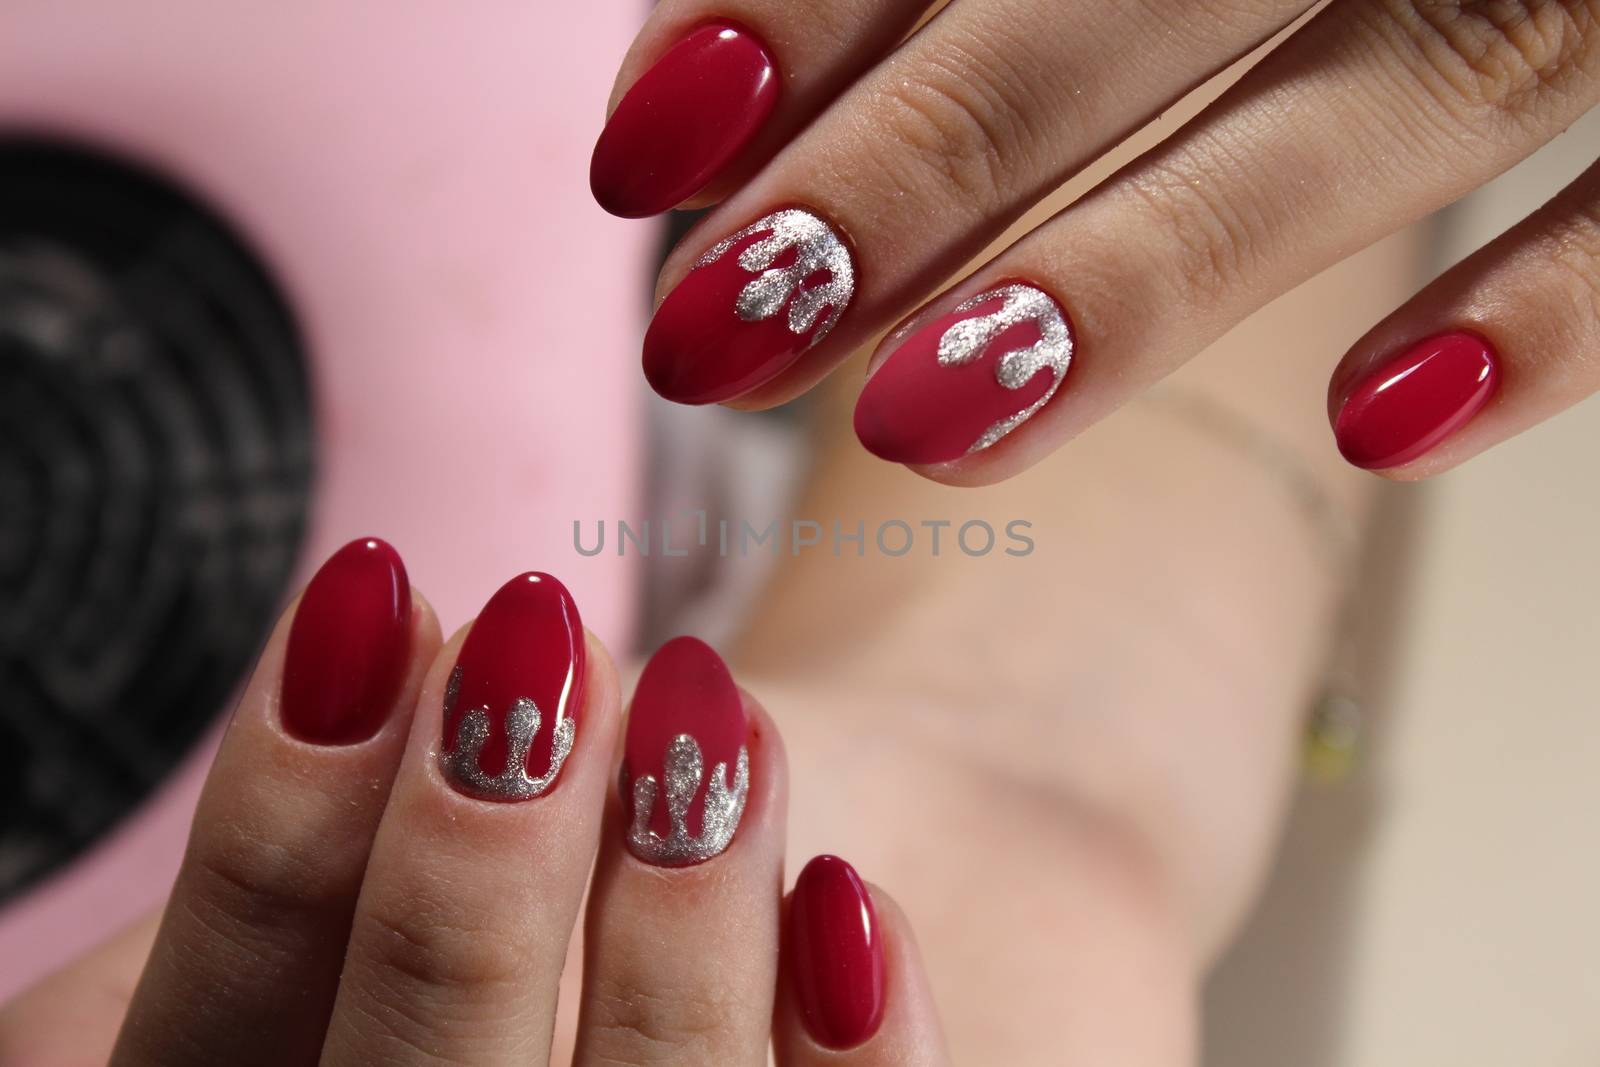 Red manicure design with silver thread 2017